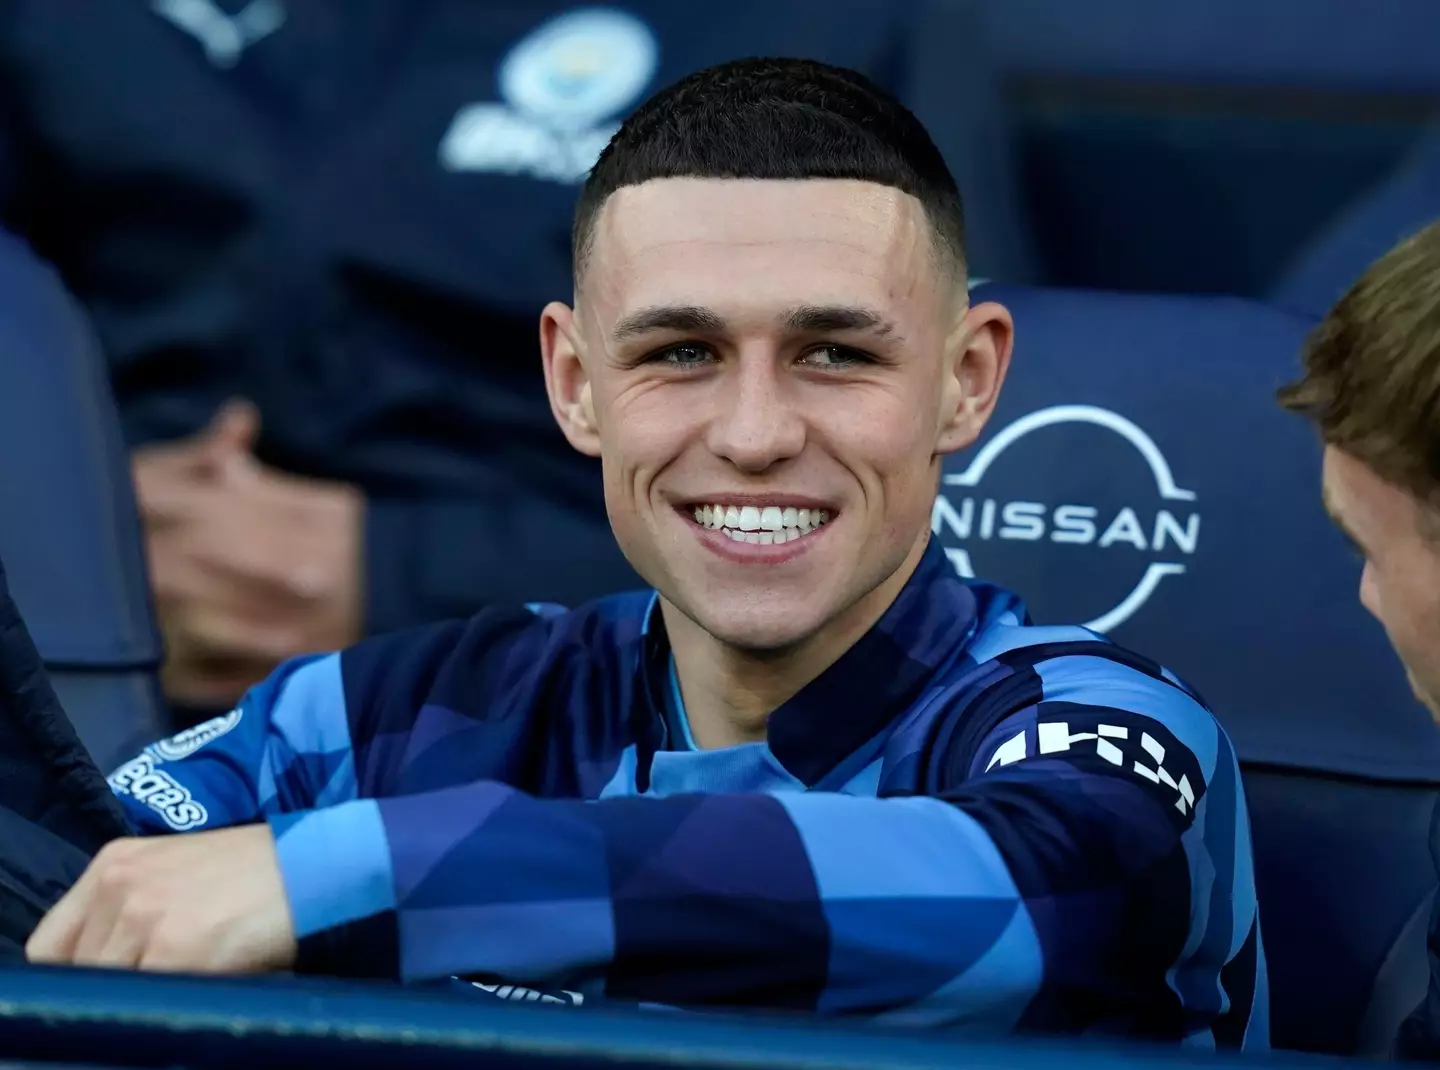 Foden has been on the bench quite a bit recently. Image: Alamy